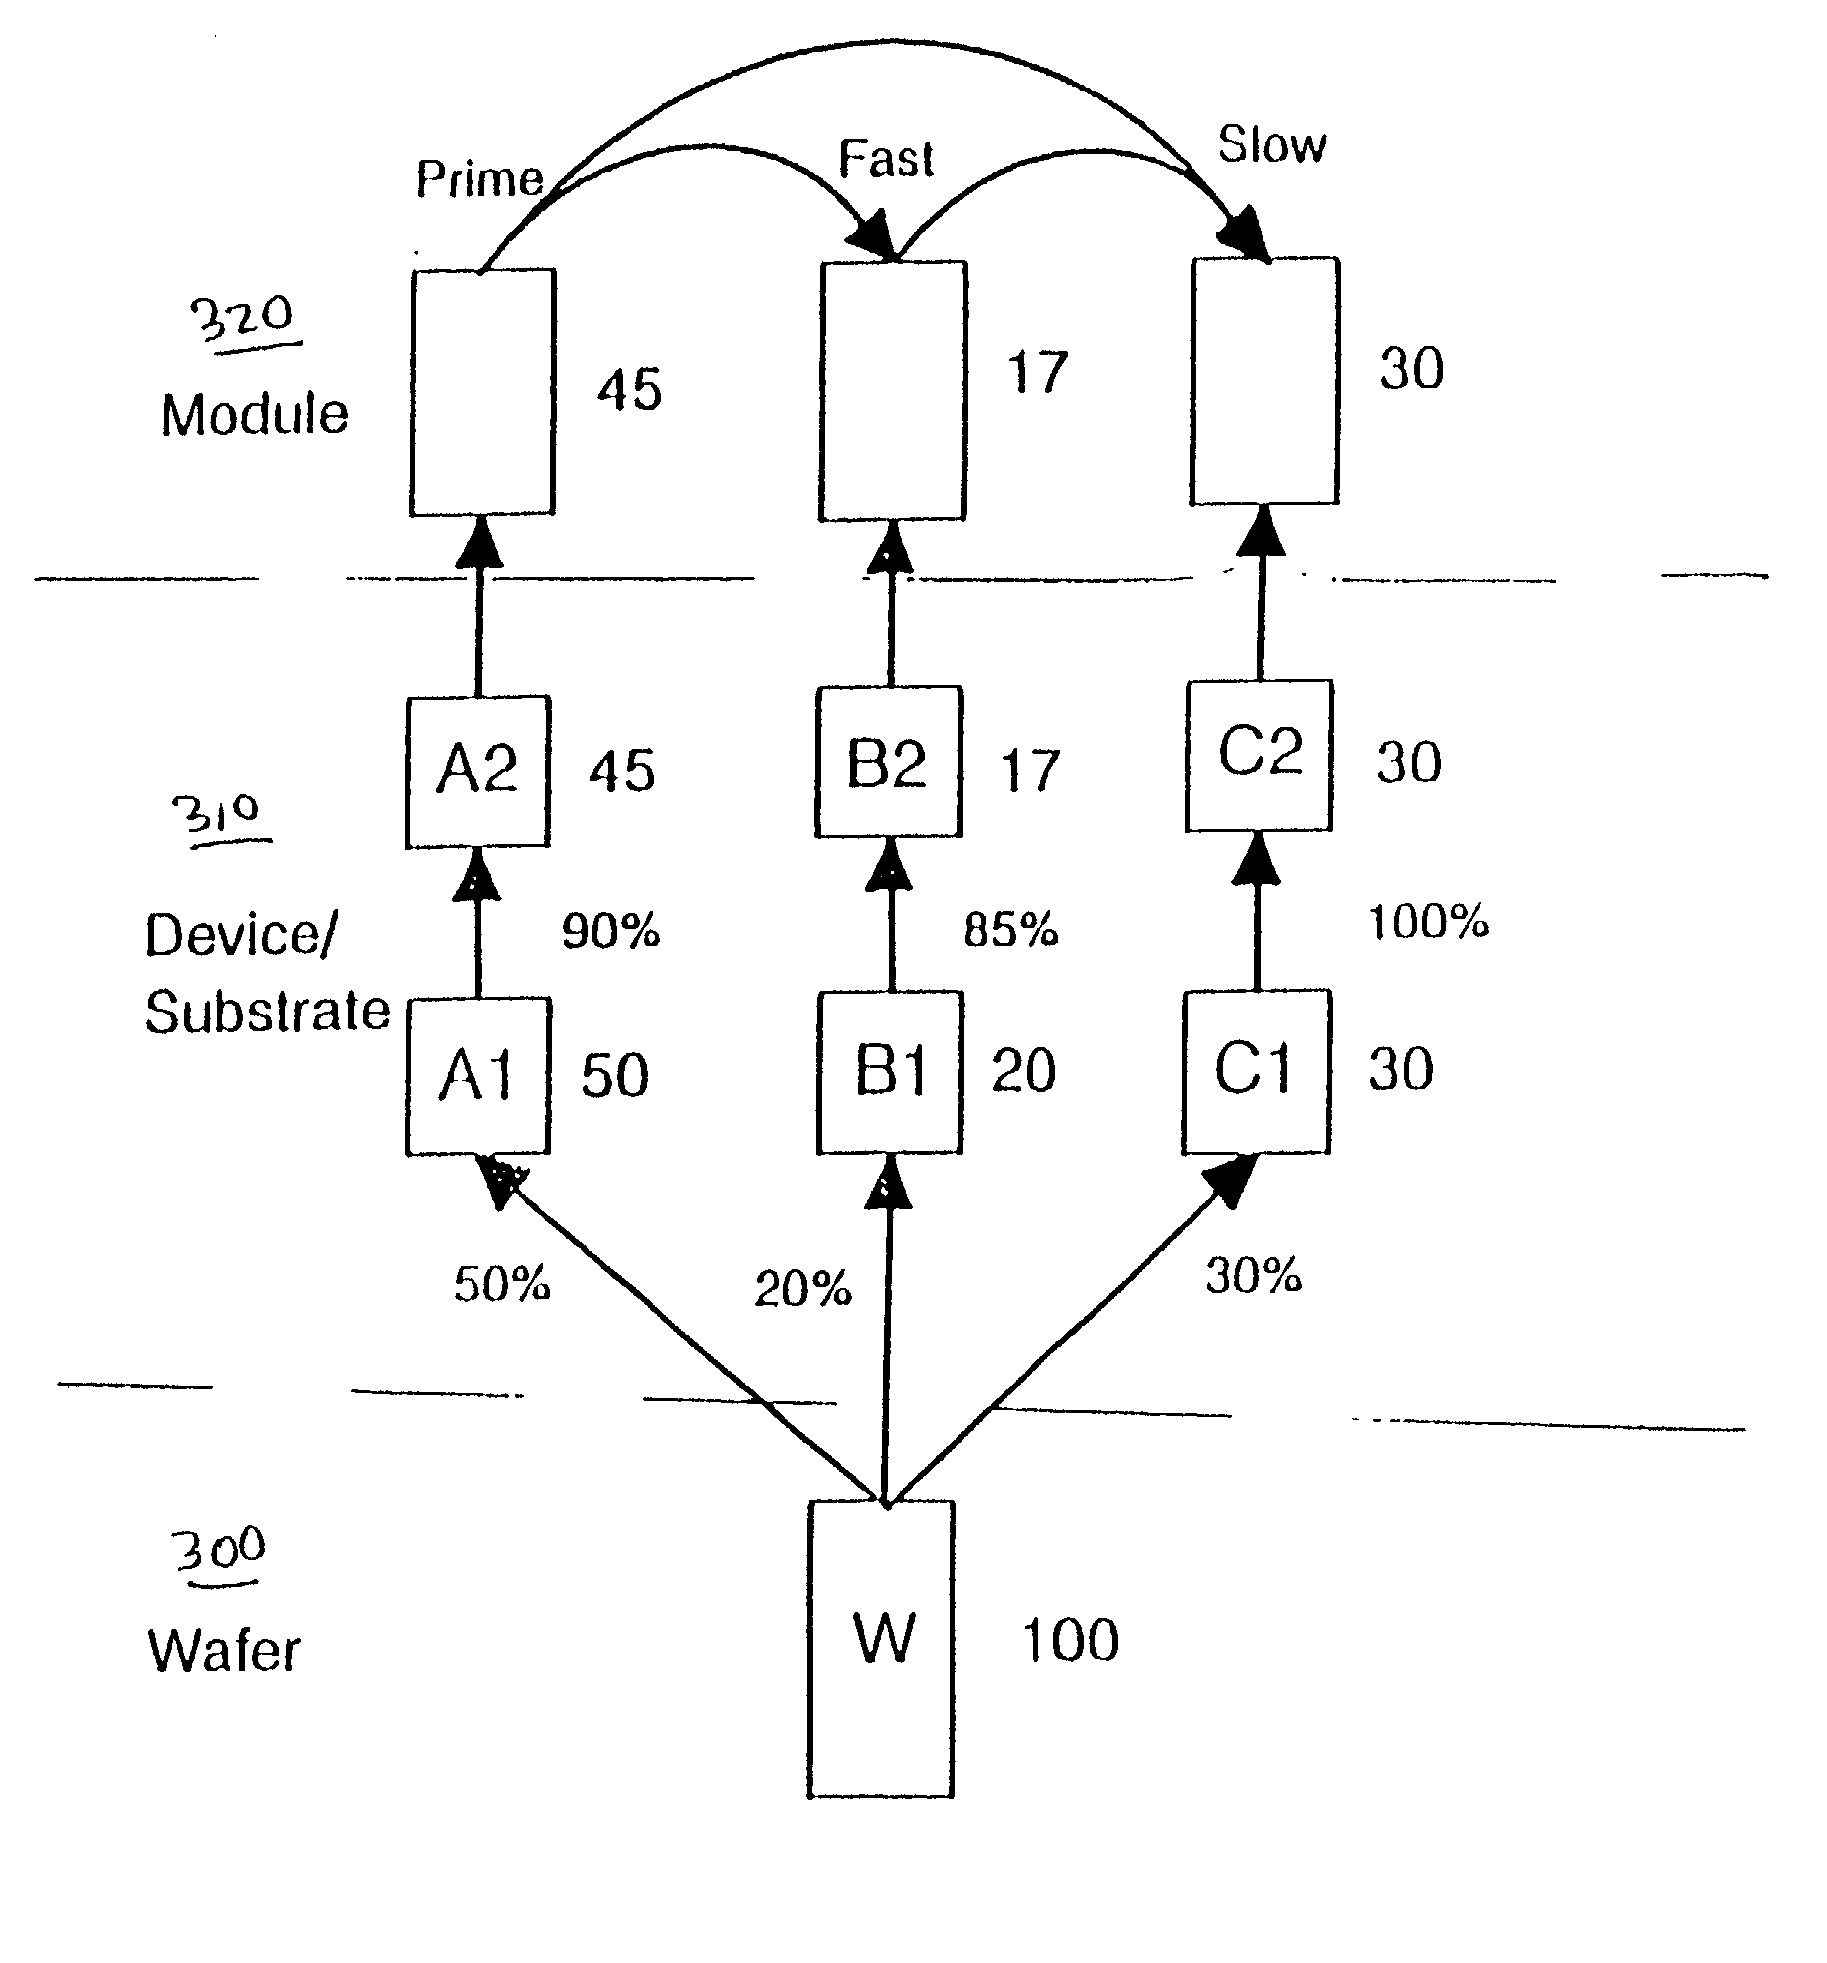 Method for allocating limited component supply and capacity to optimize production scheduling